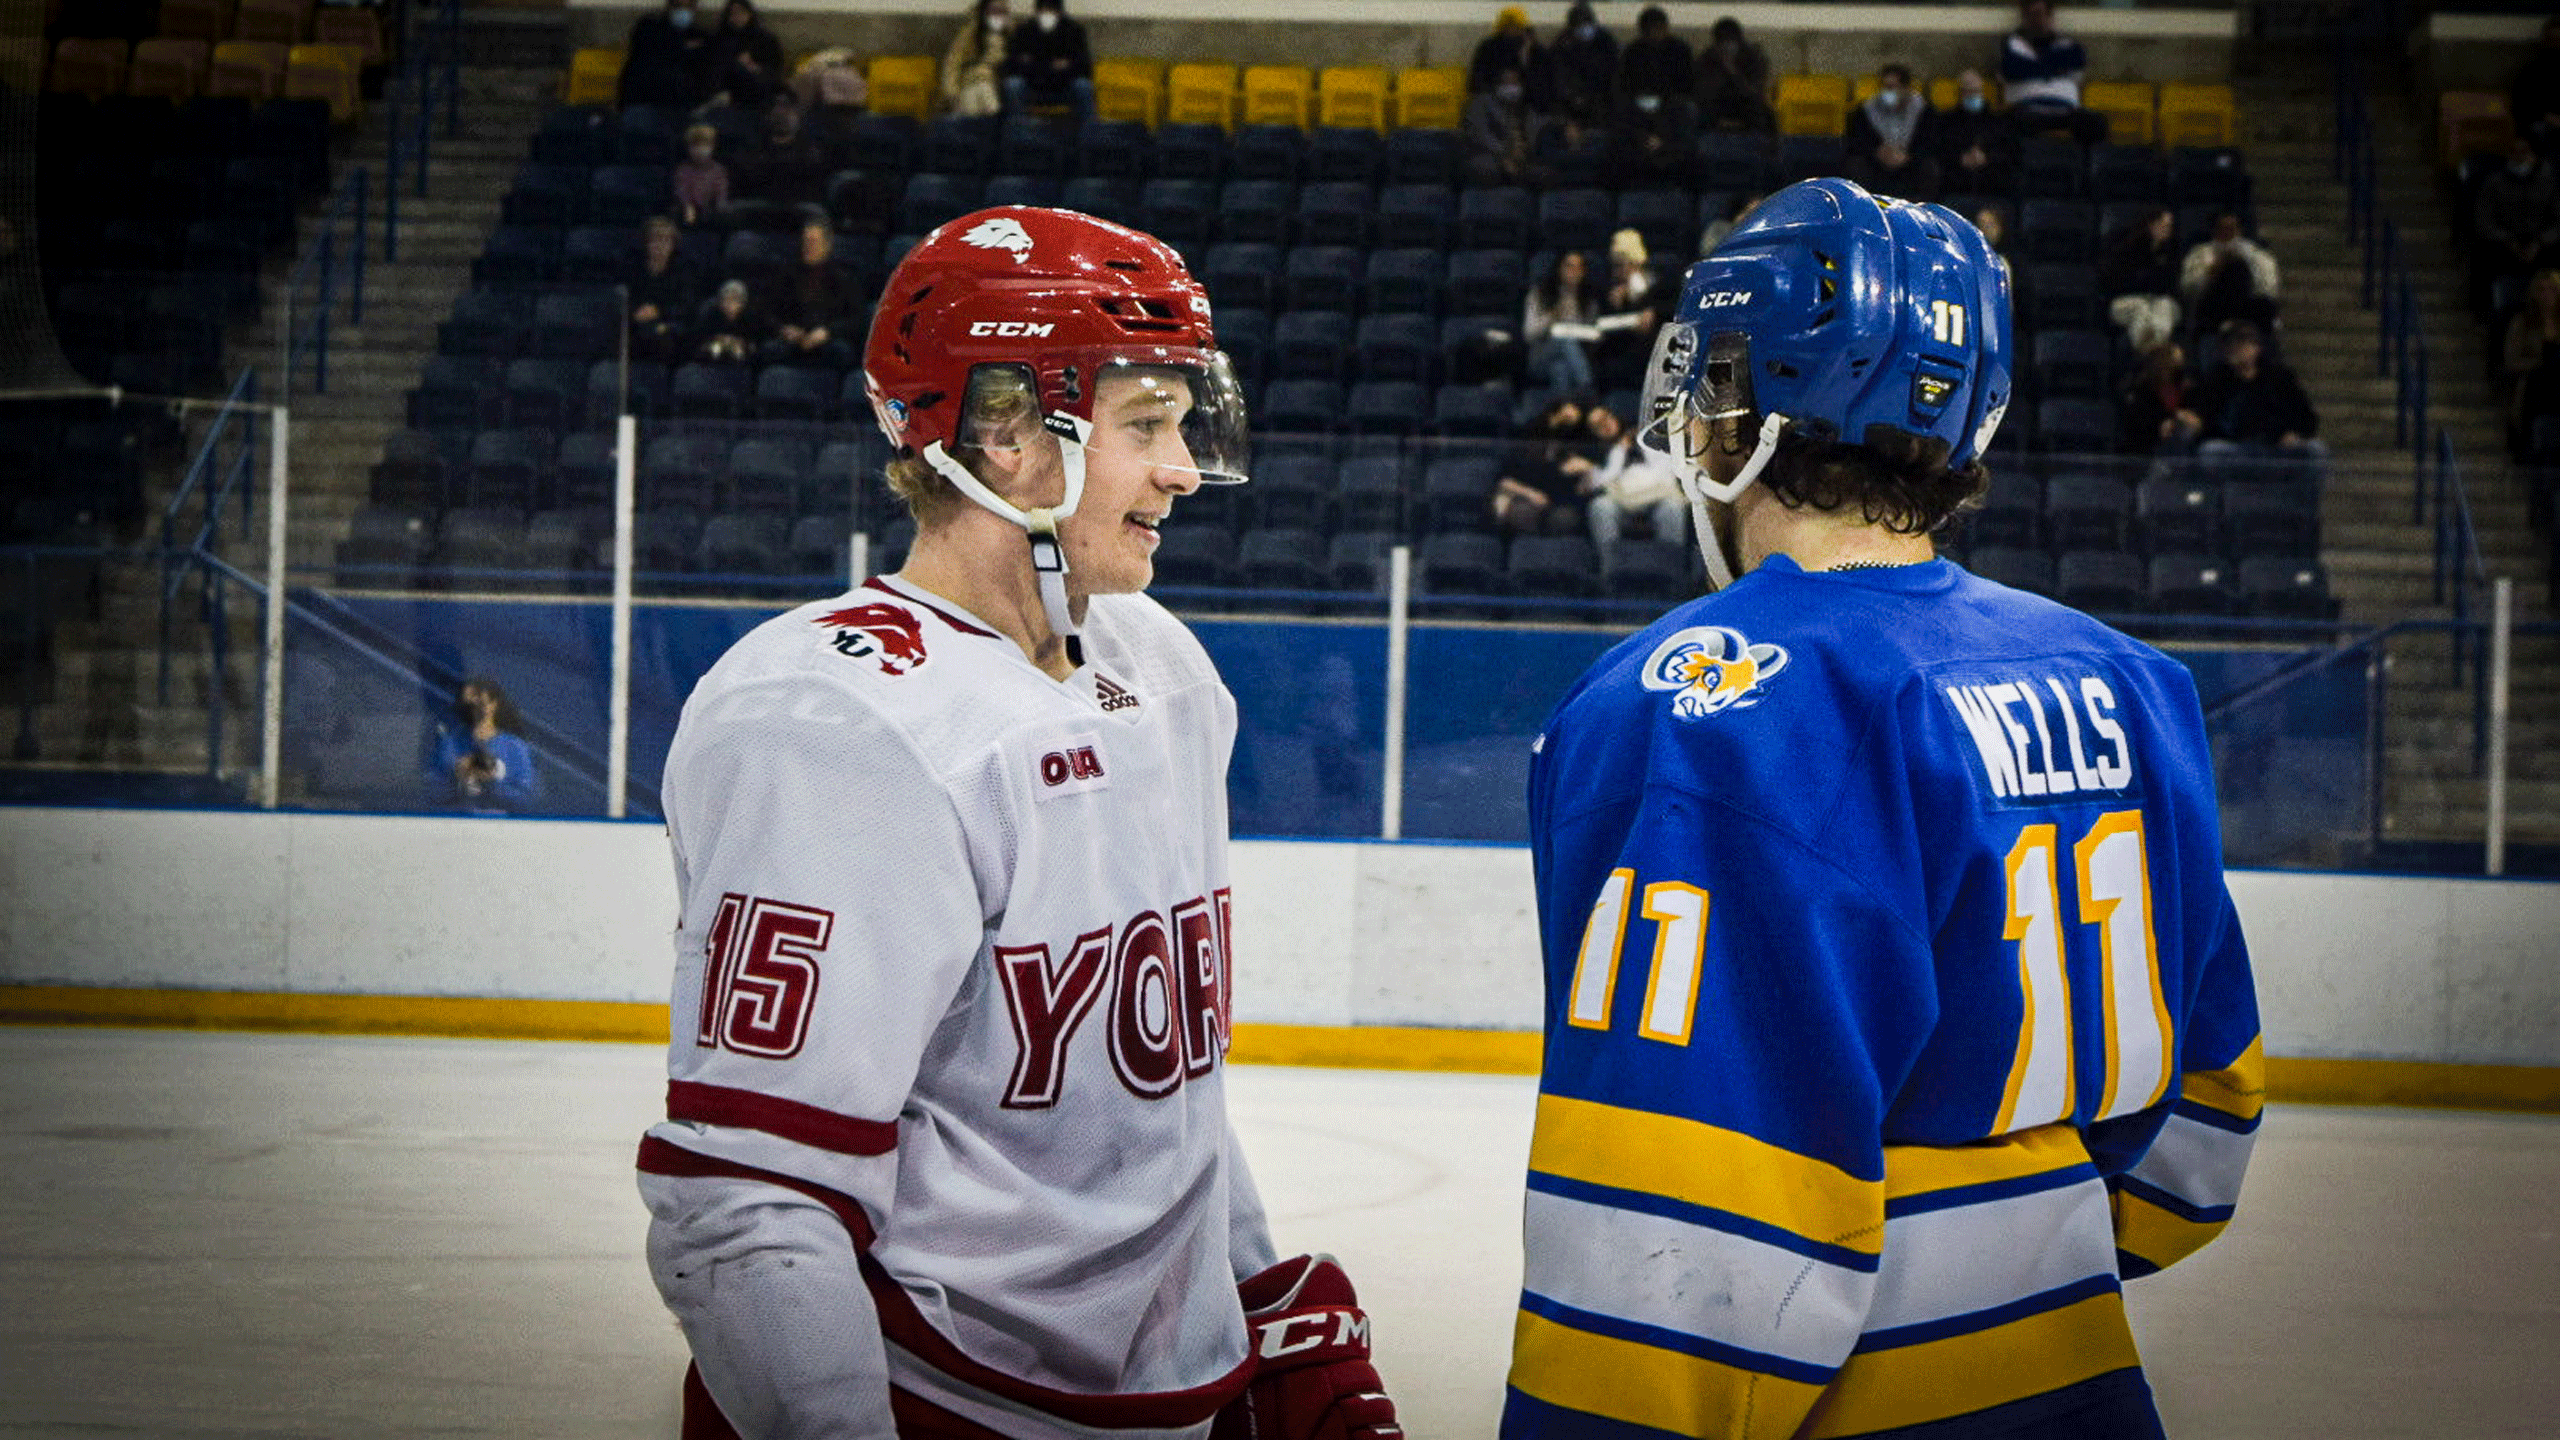 A Rams men's hockey player in a blue jersey chats it up with a York Lions player in a white jersey